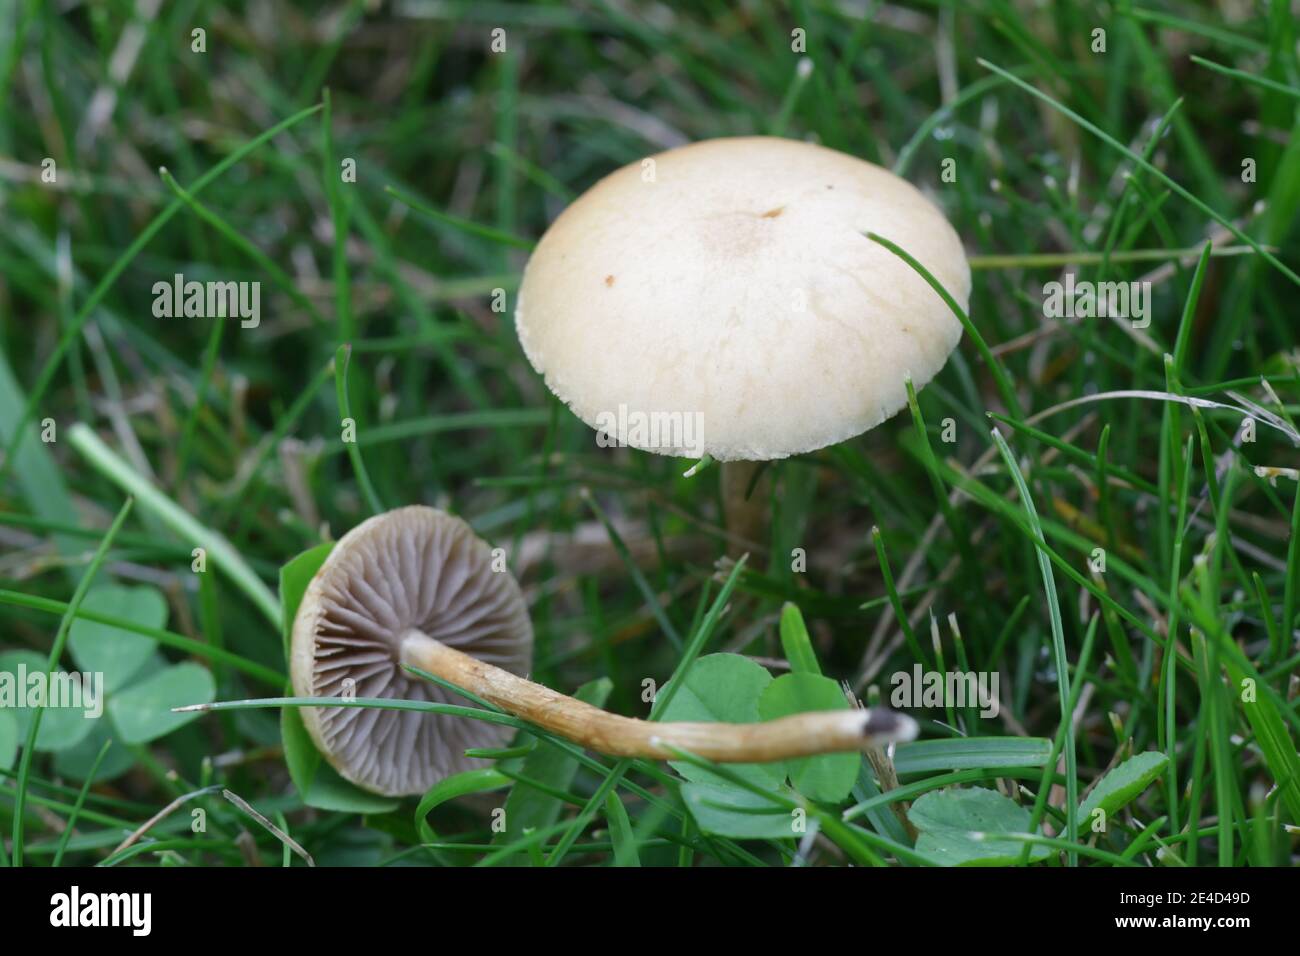 Agrocybe pediales, known as Common Fieldcap, wild mushroom from Finland Stock Photo